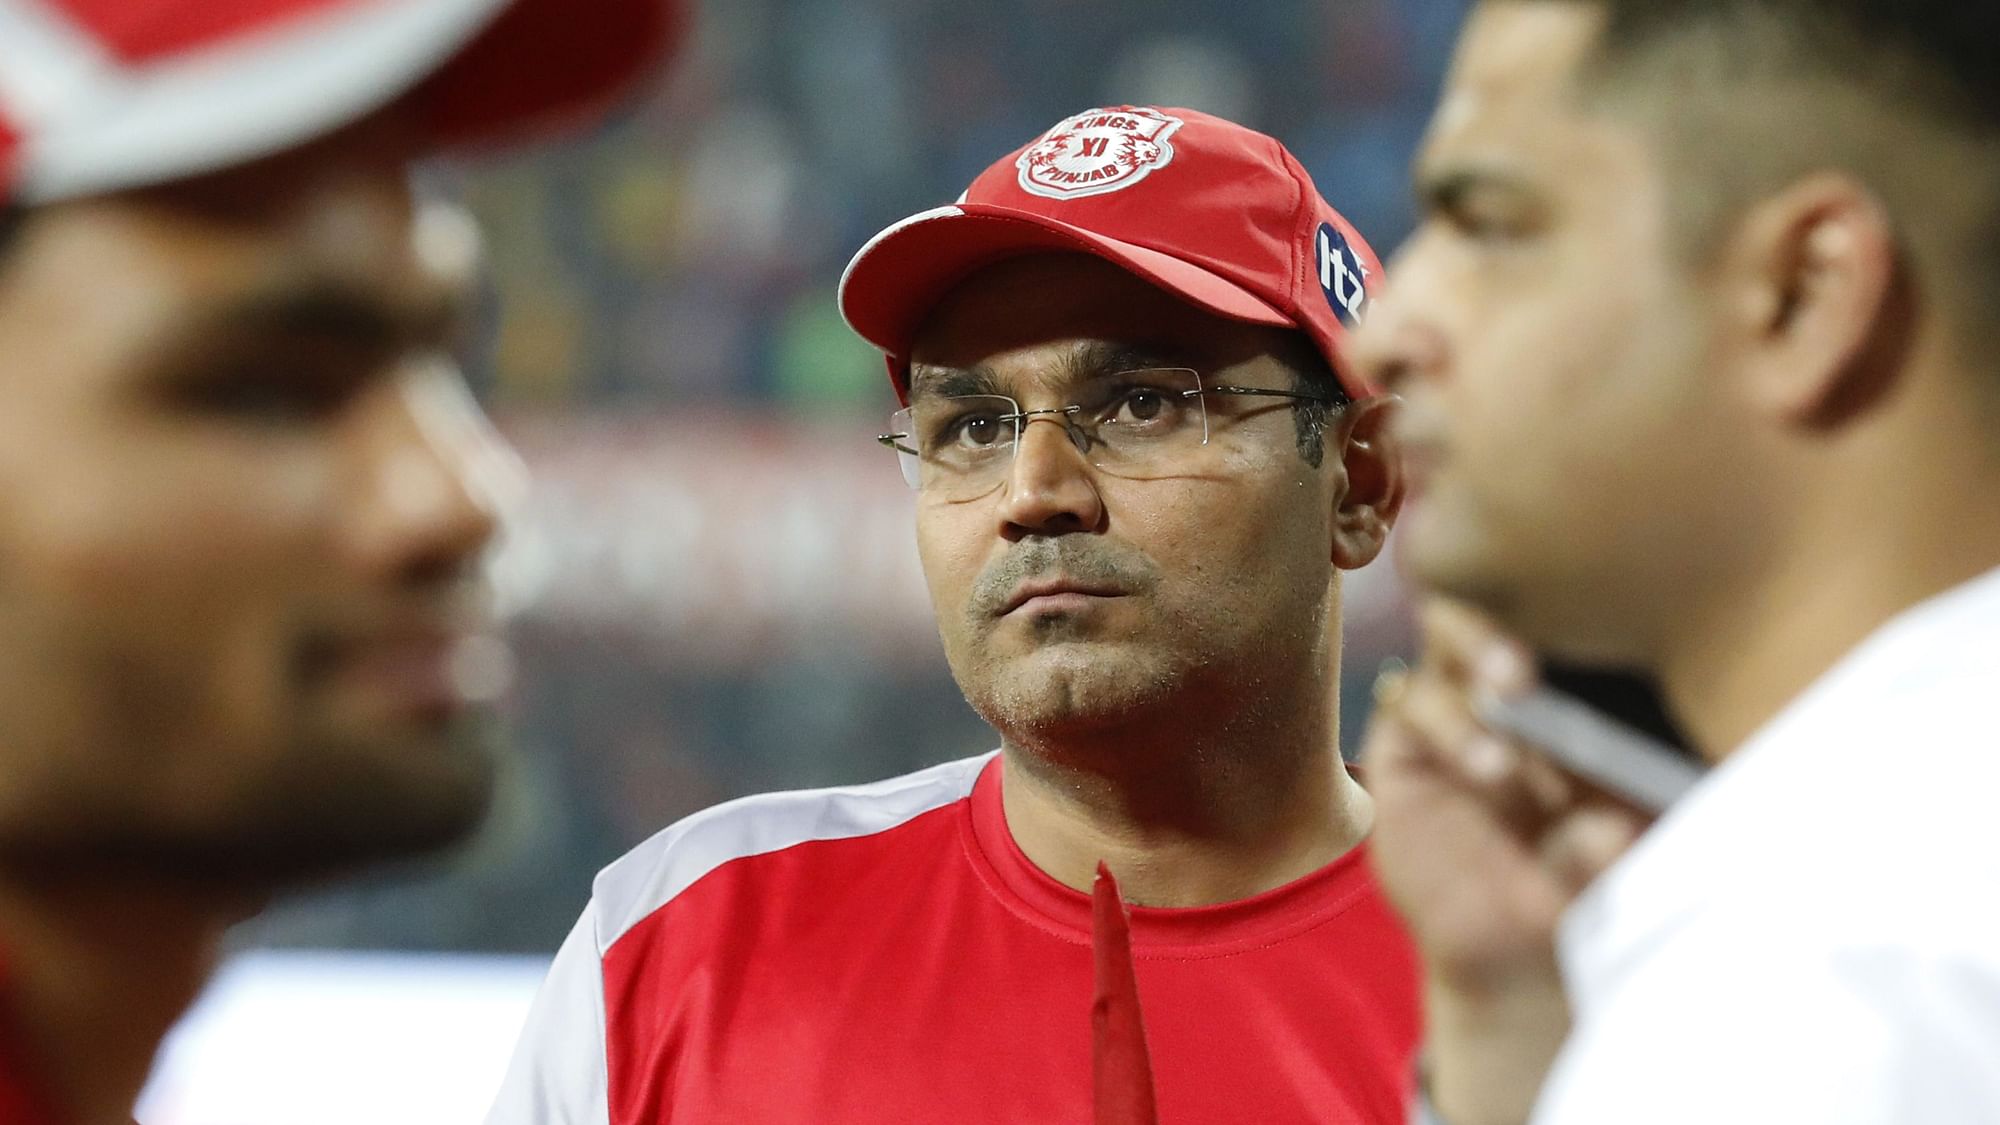 Virender Sehwag is being lauded on social media after he revealed he sent meals for migrant workers.